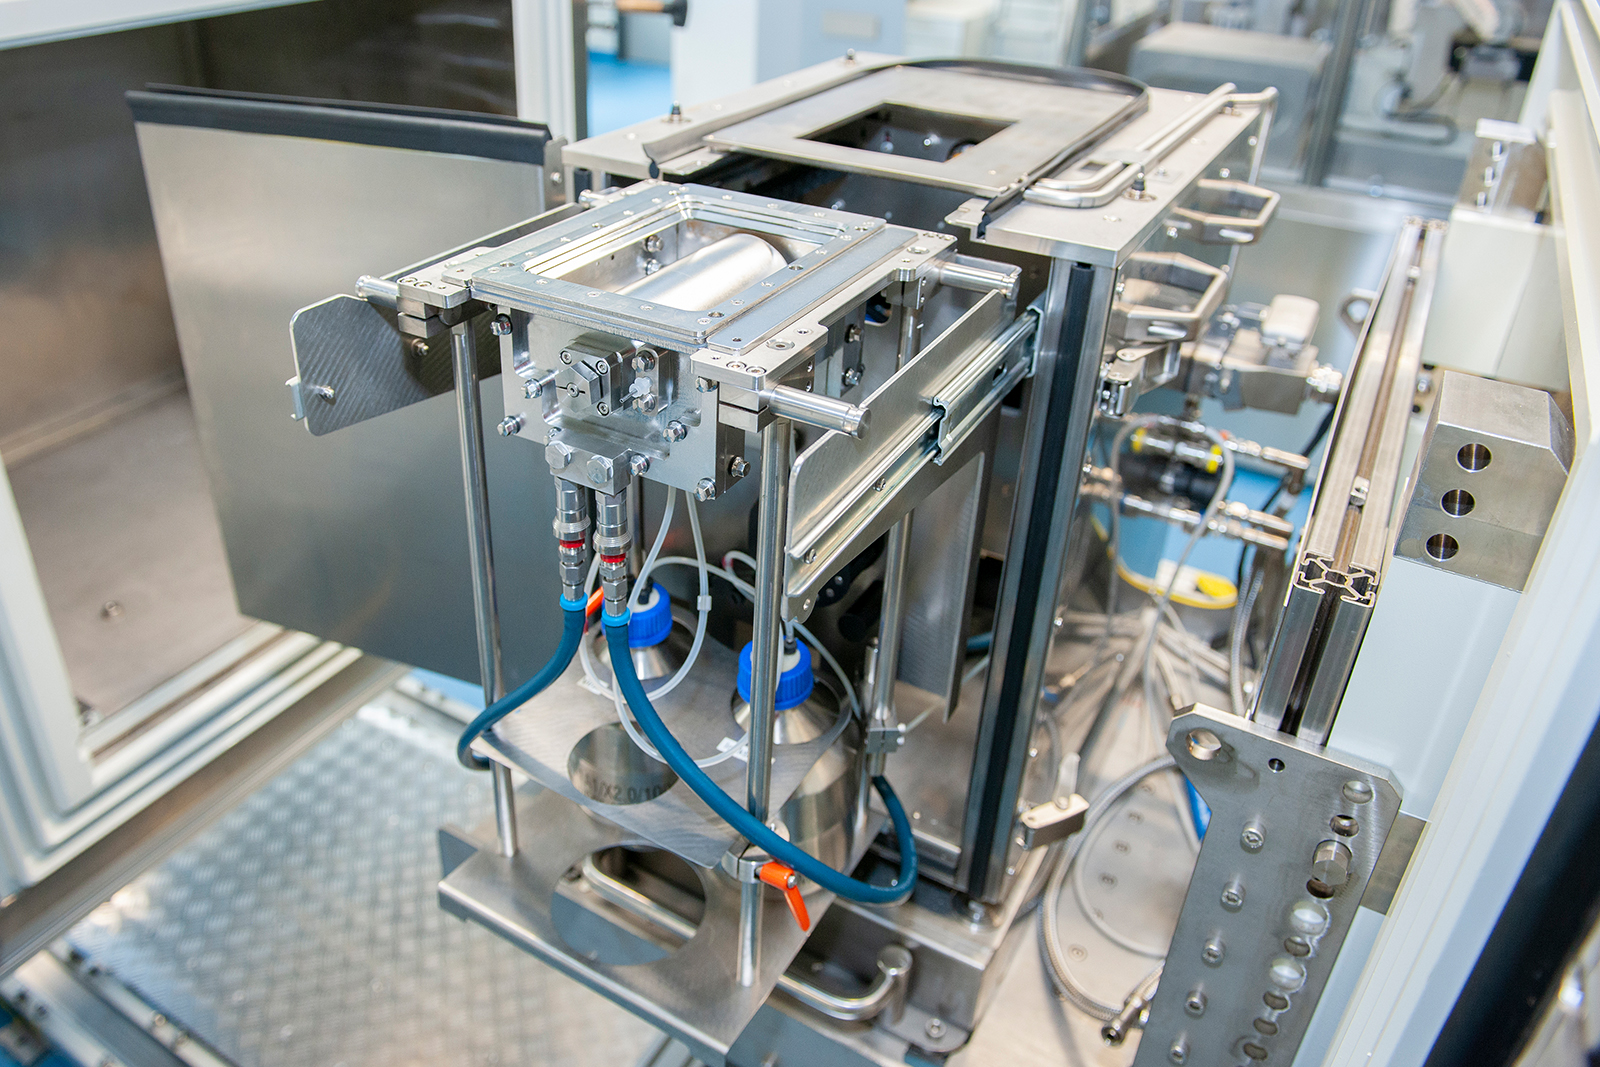 The liquid roll system in the prototype and research assembly. Development of an automated process module makes this technology easily scalable and ready for use in the pharmaceutical industry.